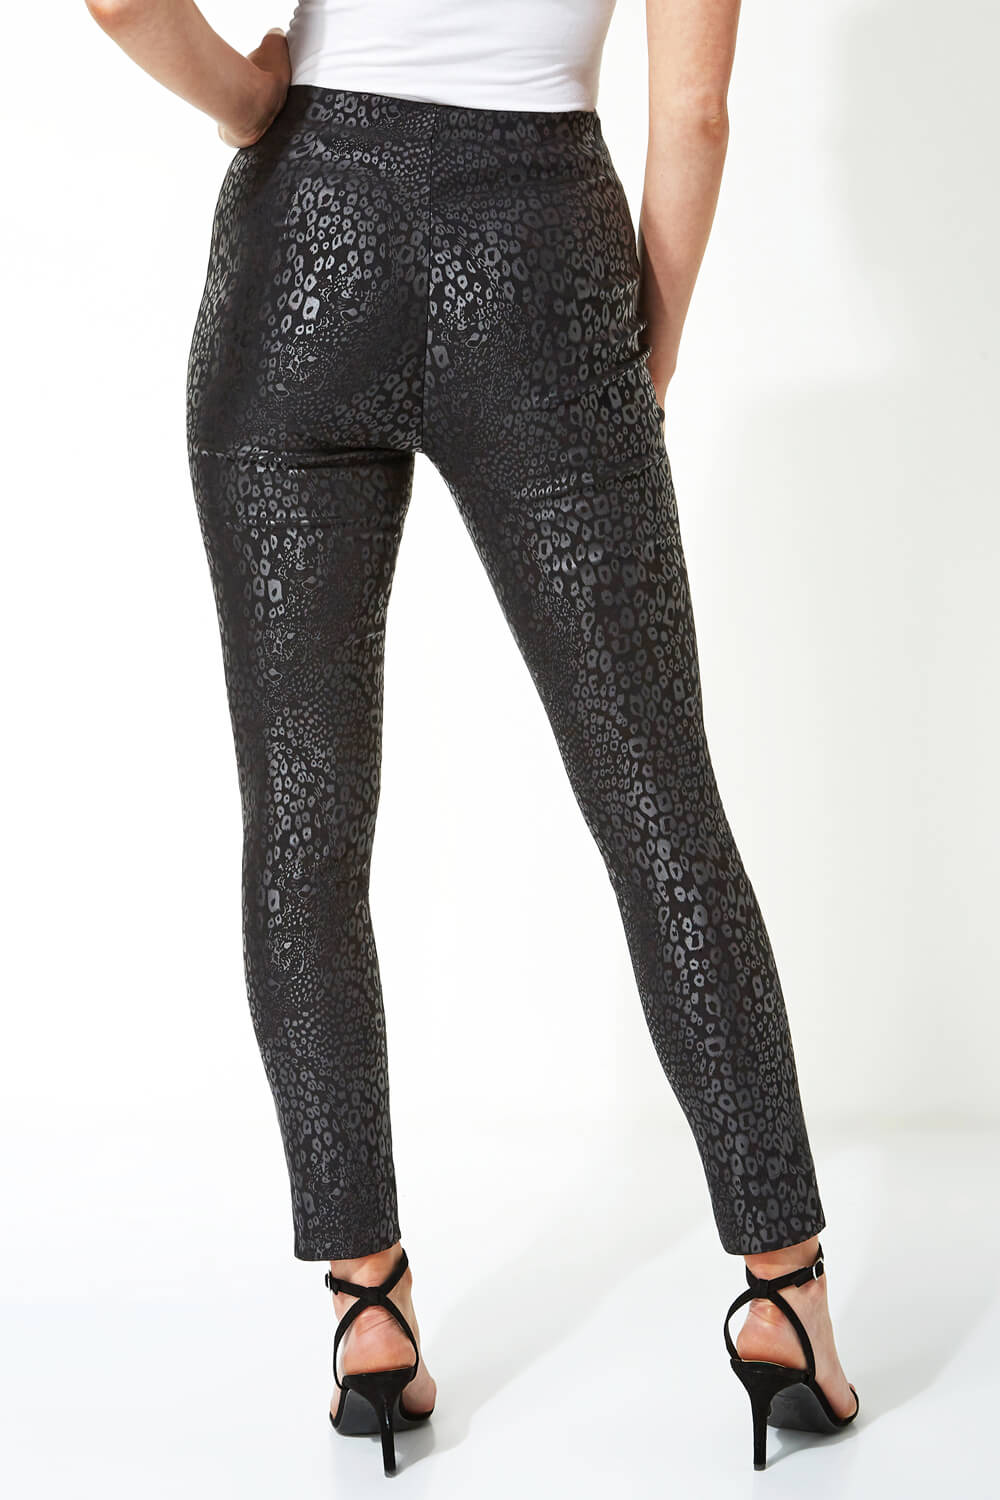 Black Animal Print Full Length Stretch Trousers, Image 2 of 4